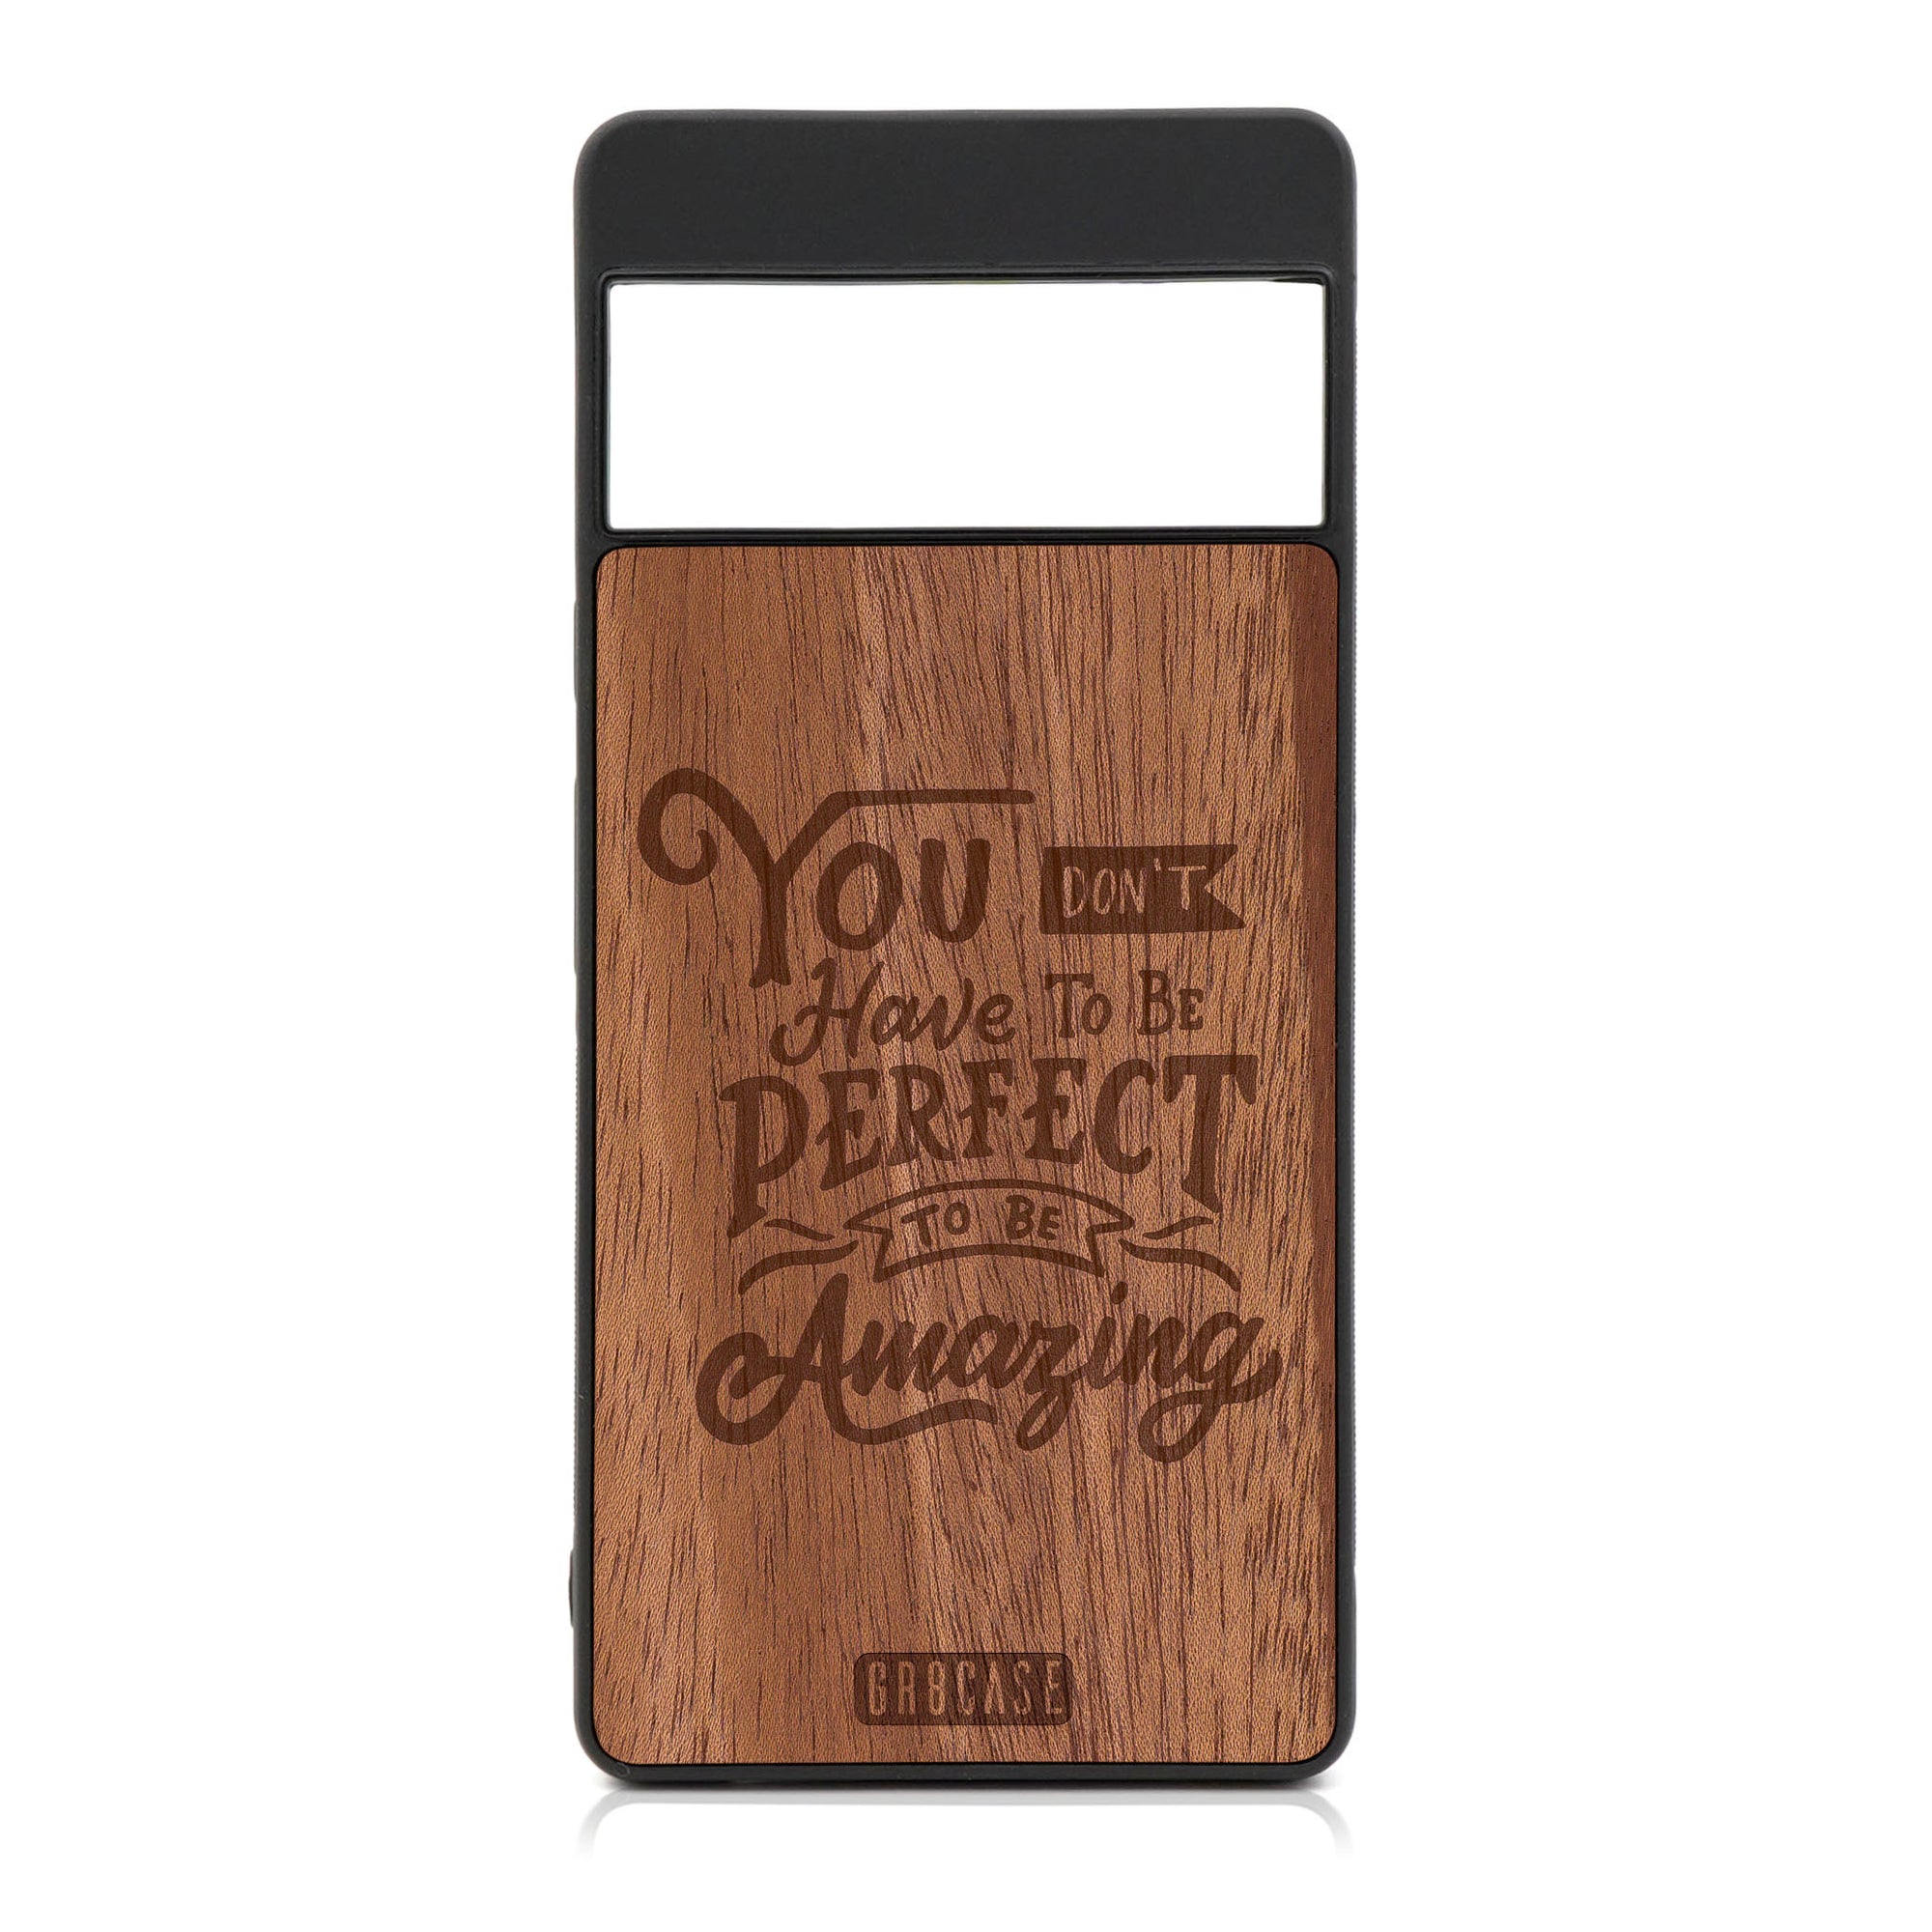 You Don't Have To Be Perfect To Be Amazing Design Wood Case For Google Pixel 6